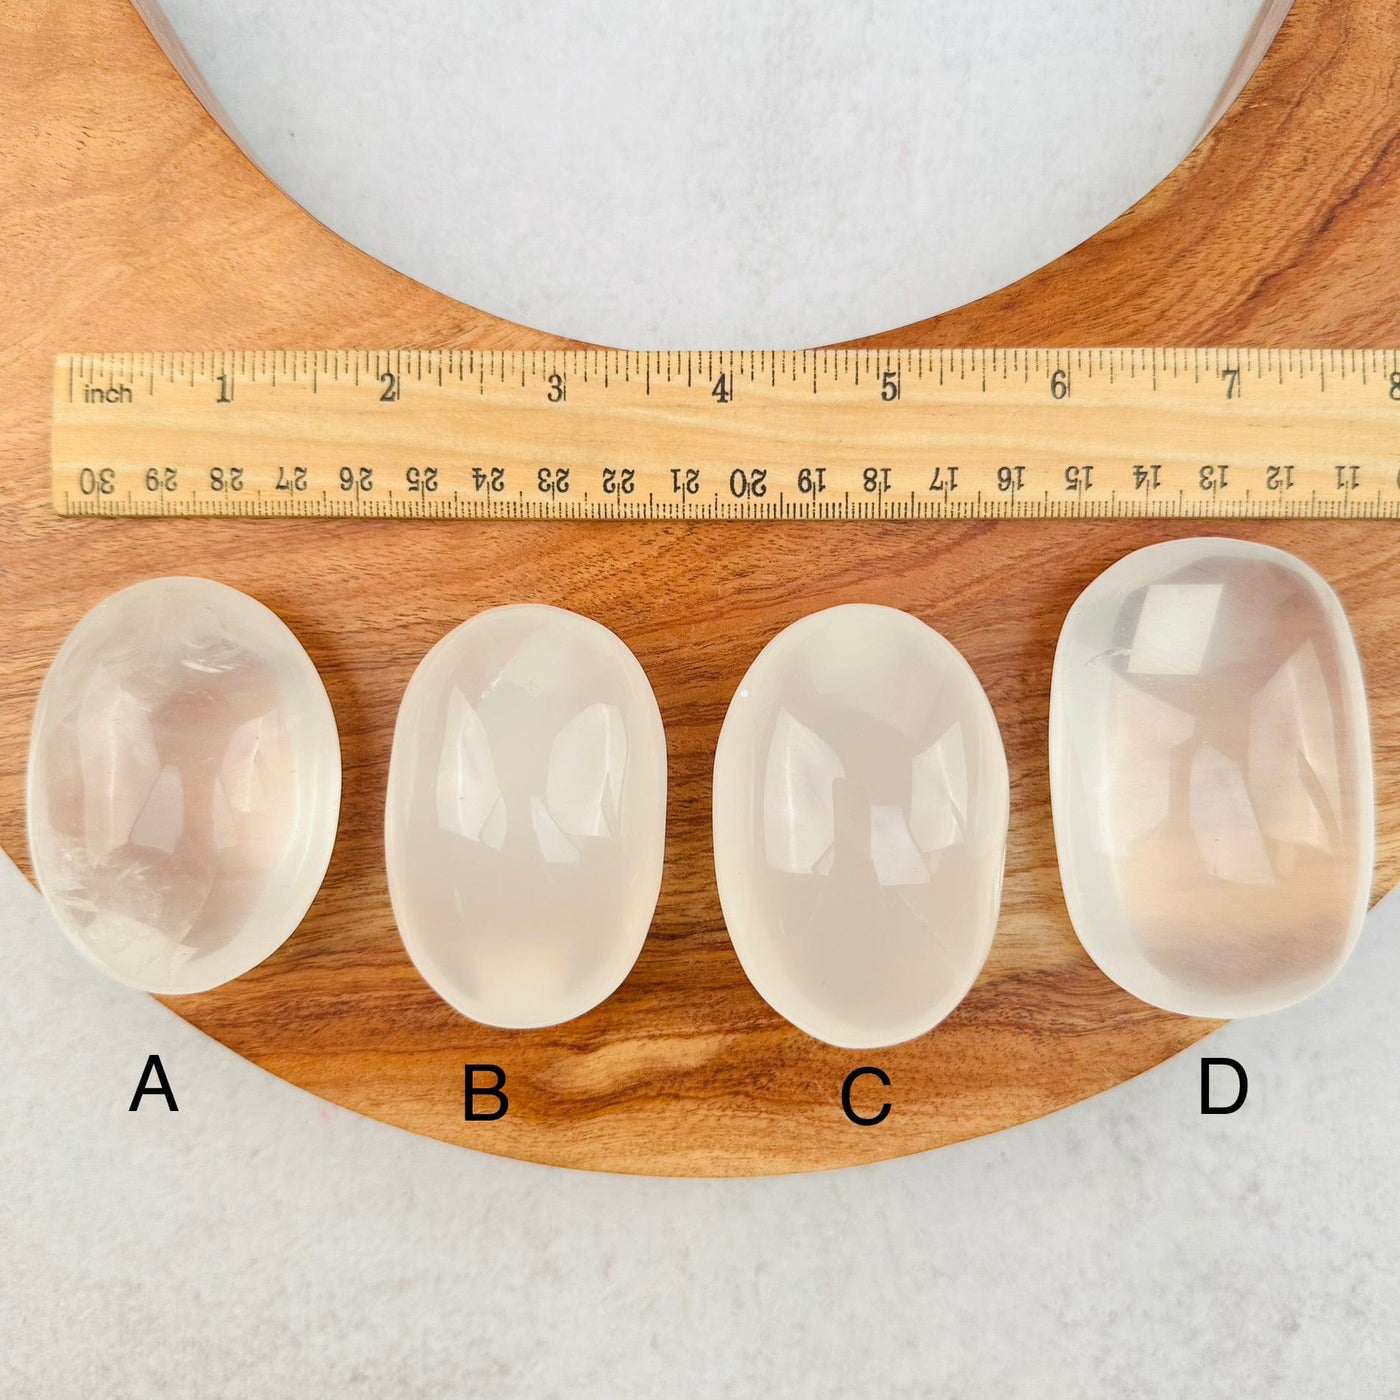 Crystal Quartz Palm Stones - High Quality - next to a ruler for size reference 